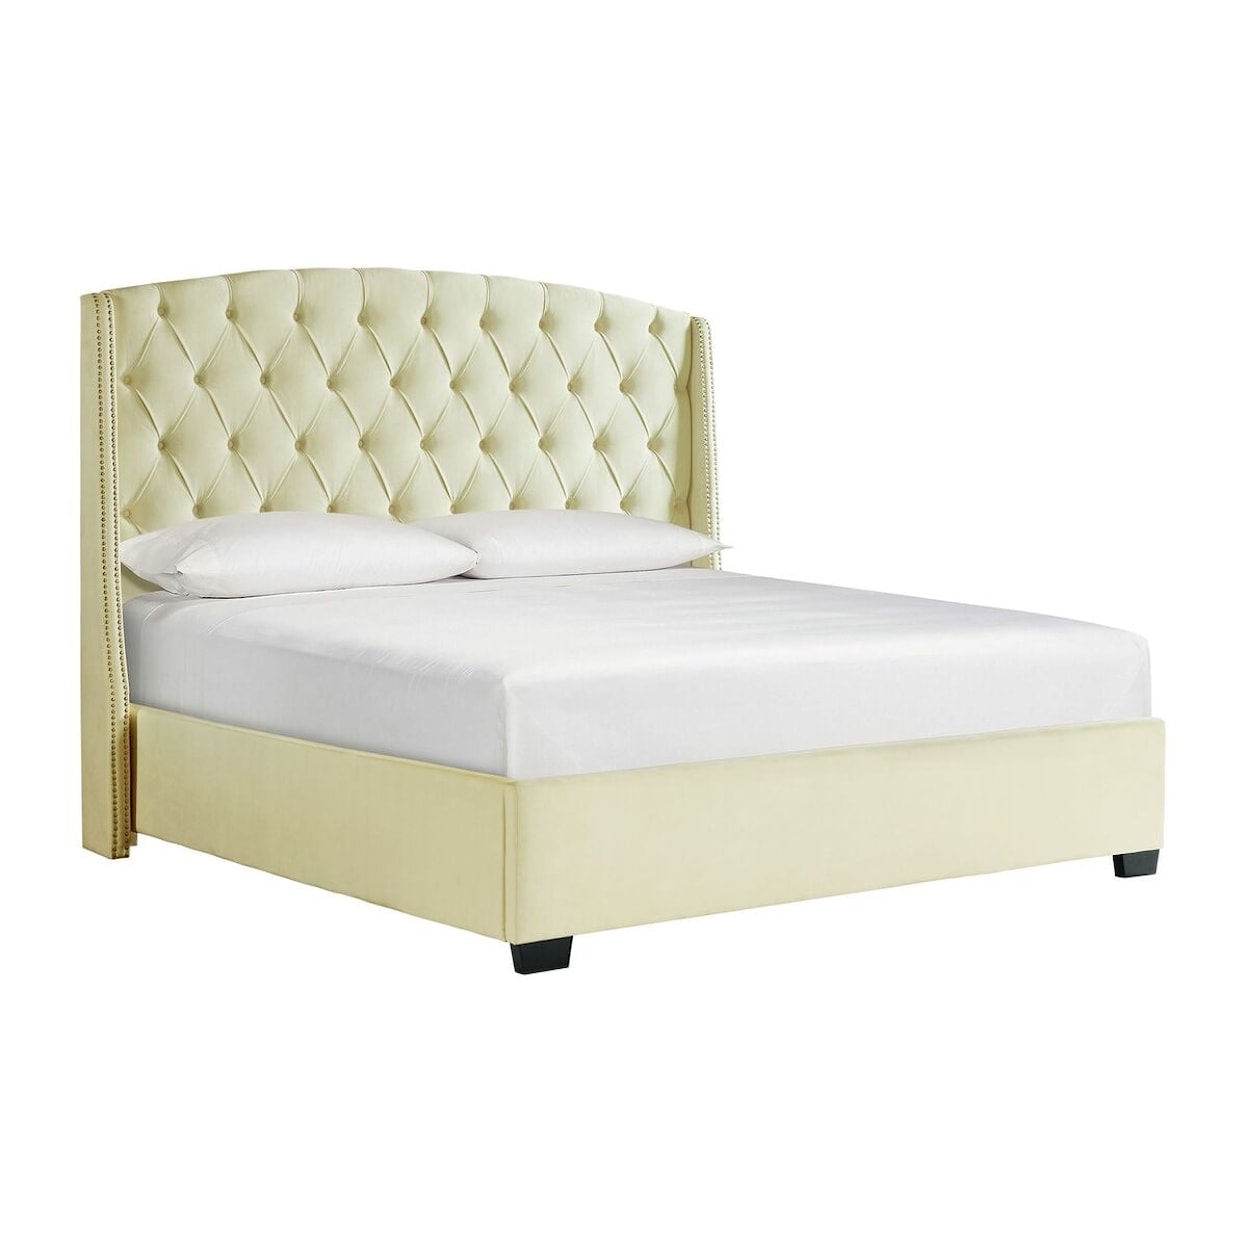 Elements Foster Upholstered Queen Platform Bed with Tufting